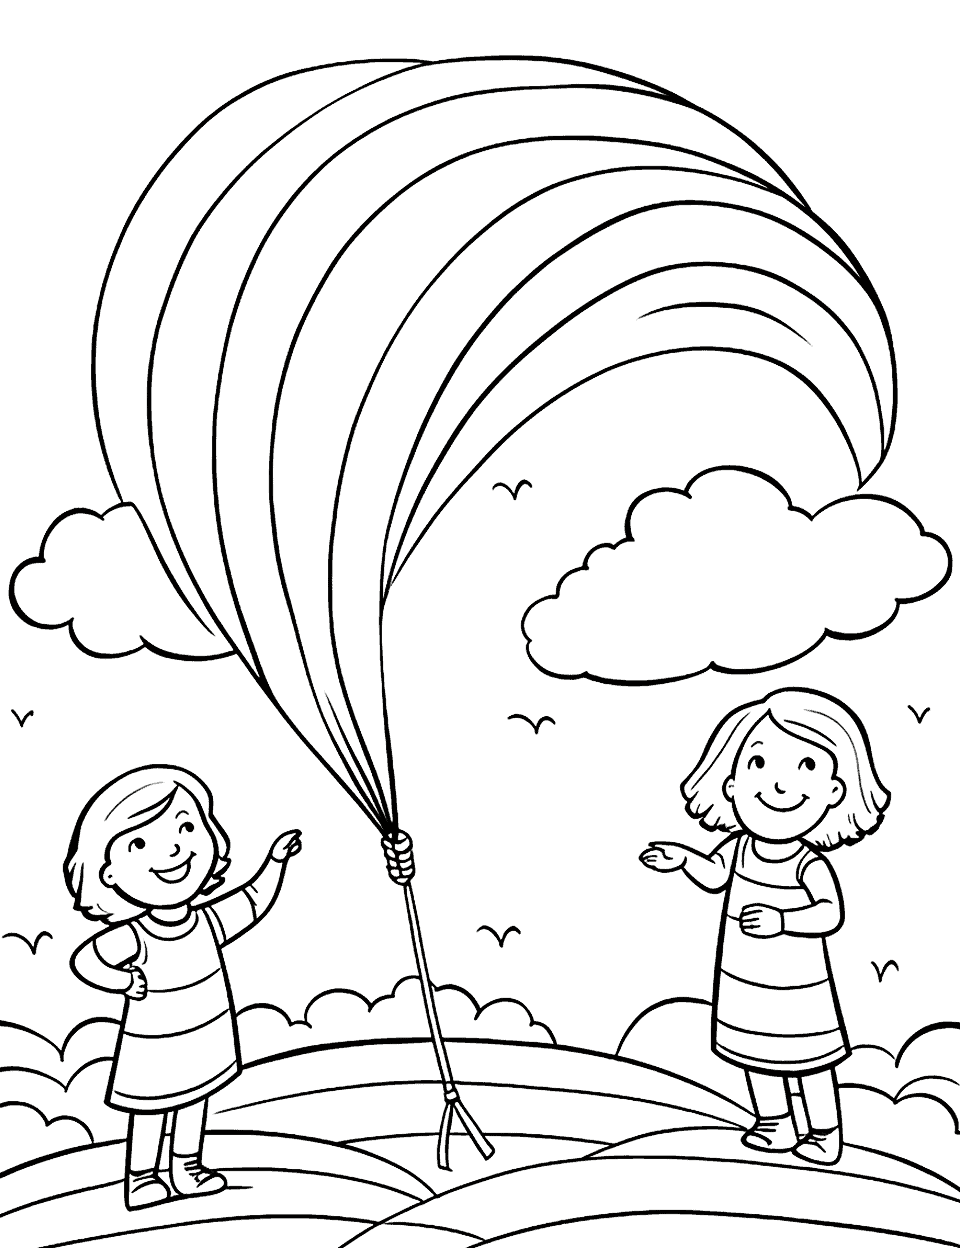 Rainbow Kite Coloring Page - Kids flying a large, rainbow-colored kite in a park.